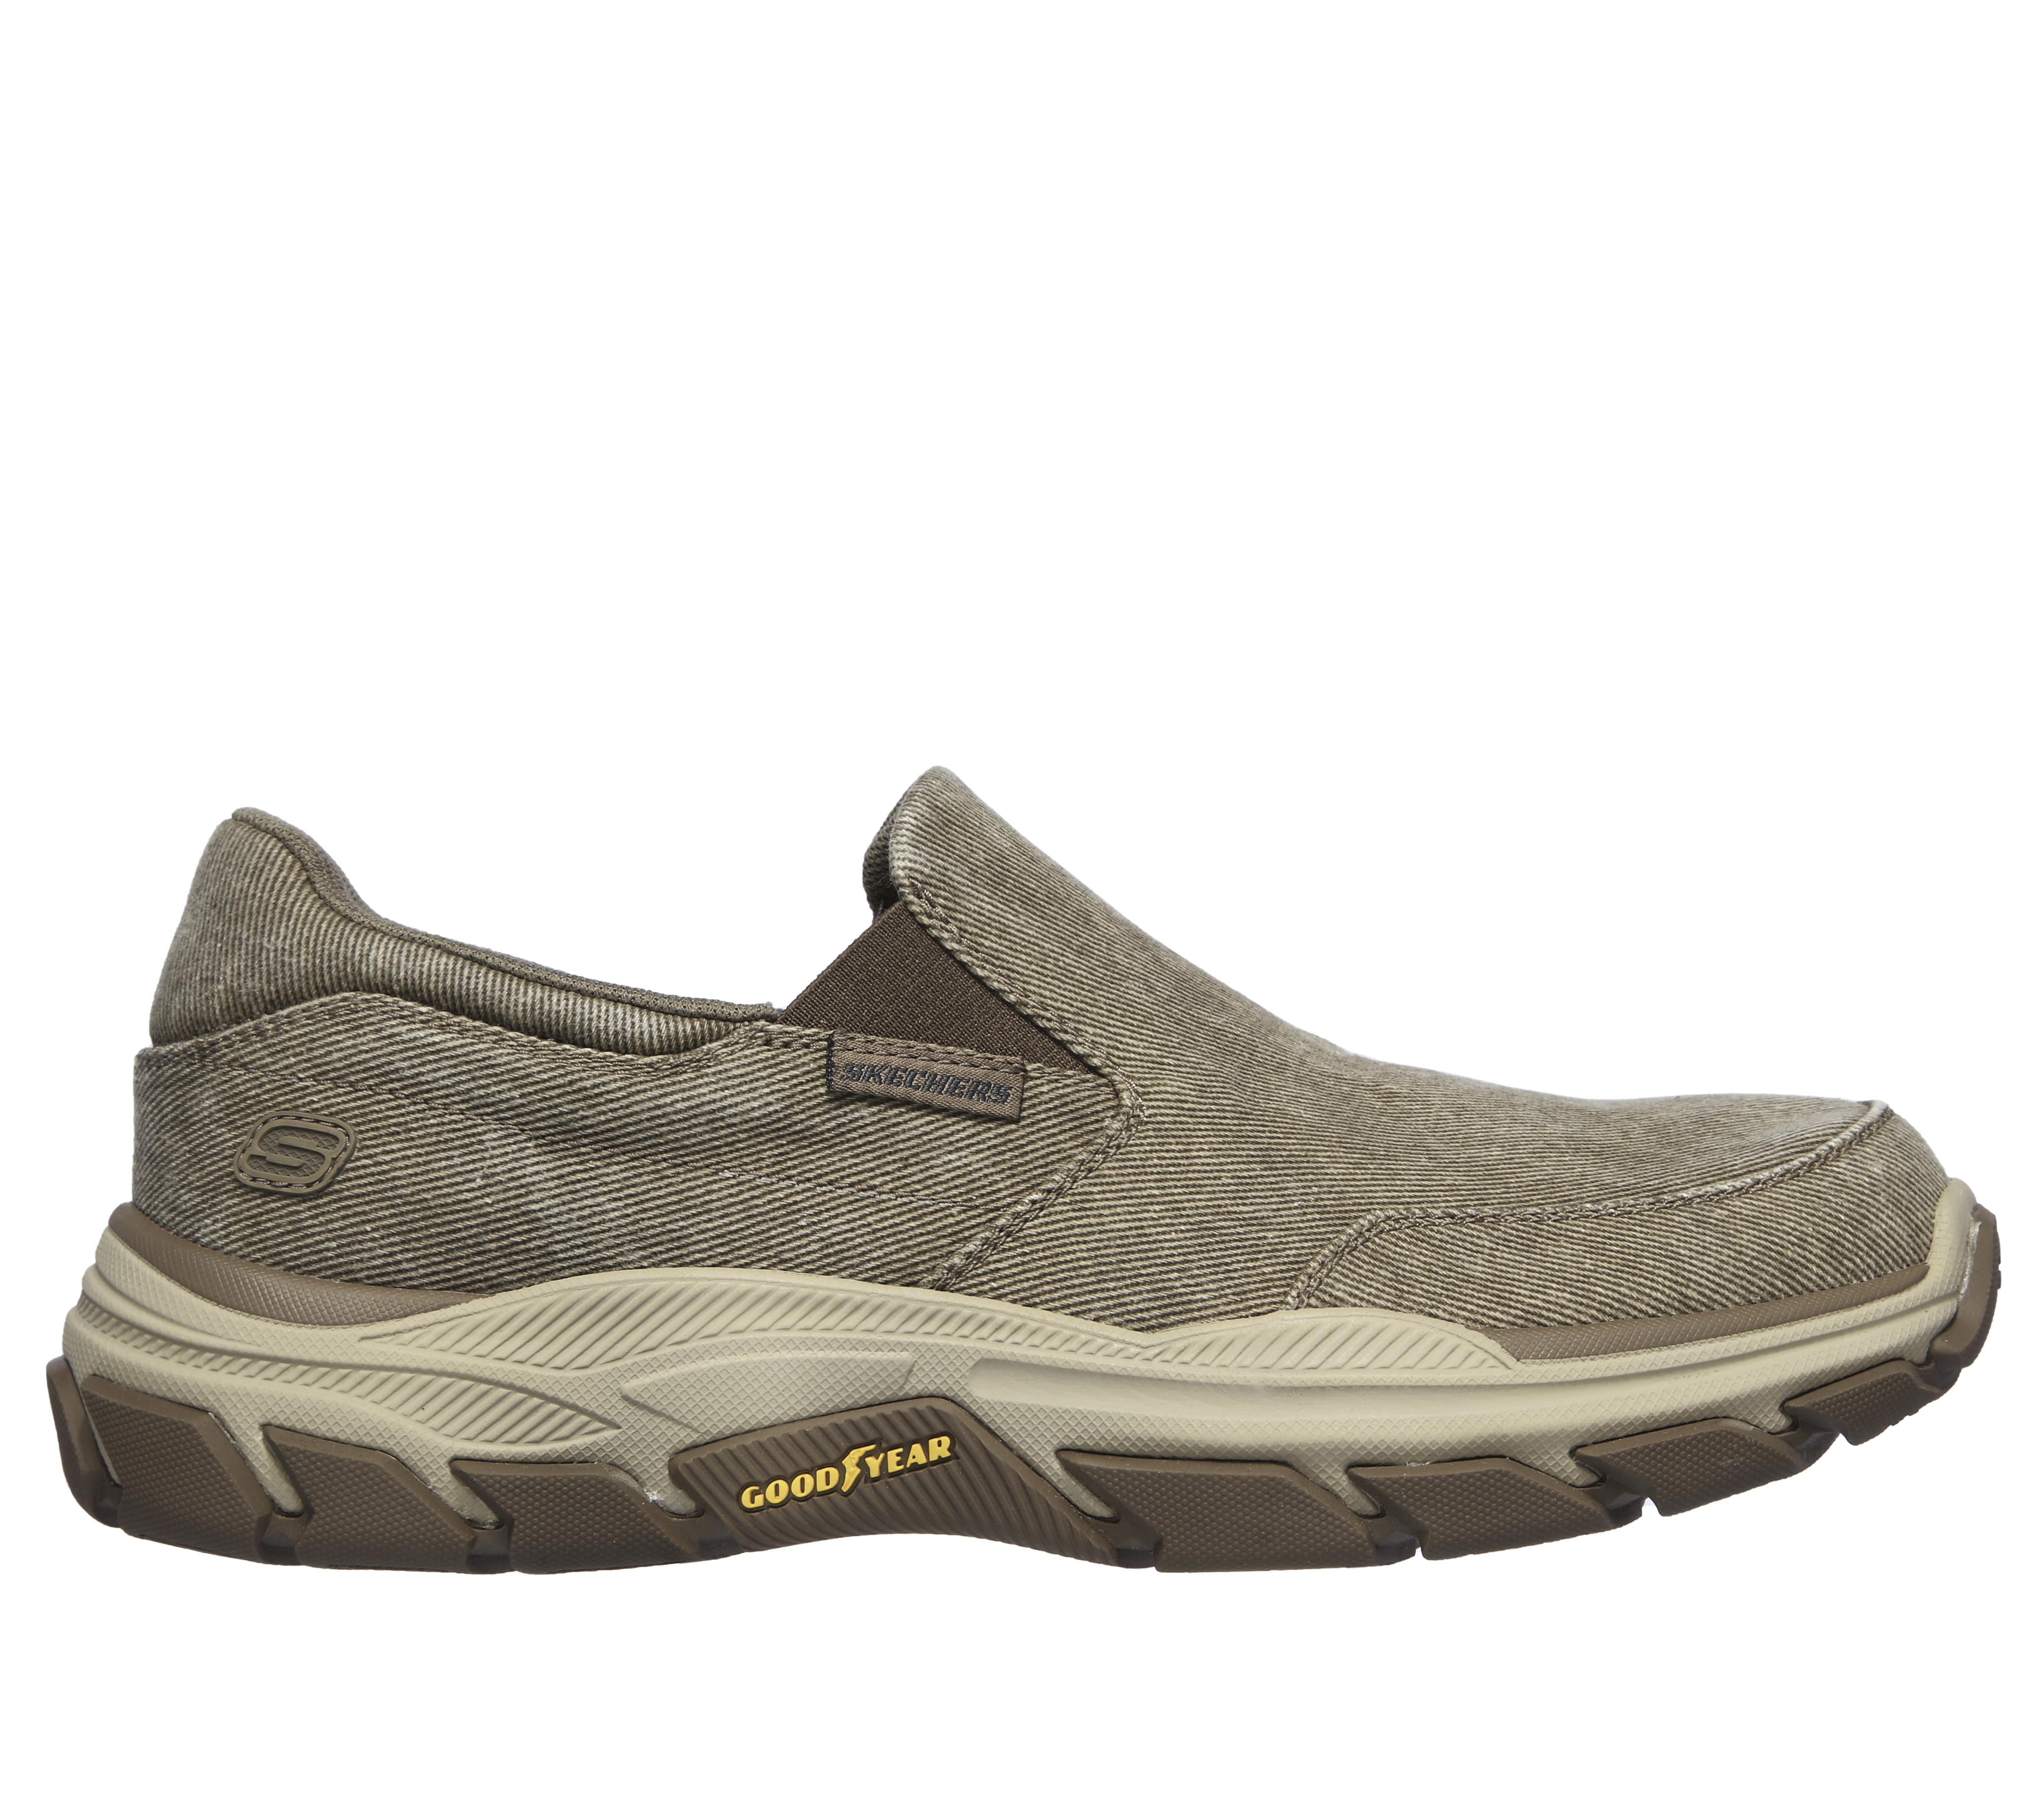 Shop the Relaxed Fit: Respected - Fallston | SKECHERS